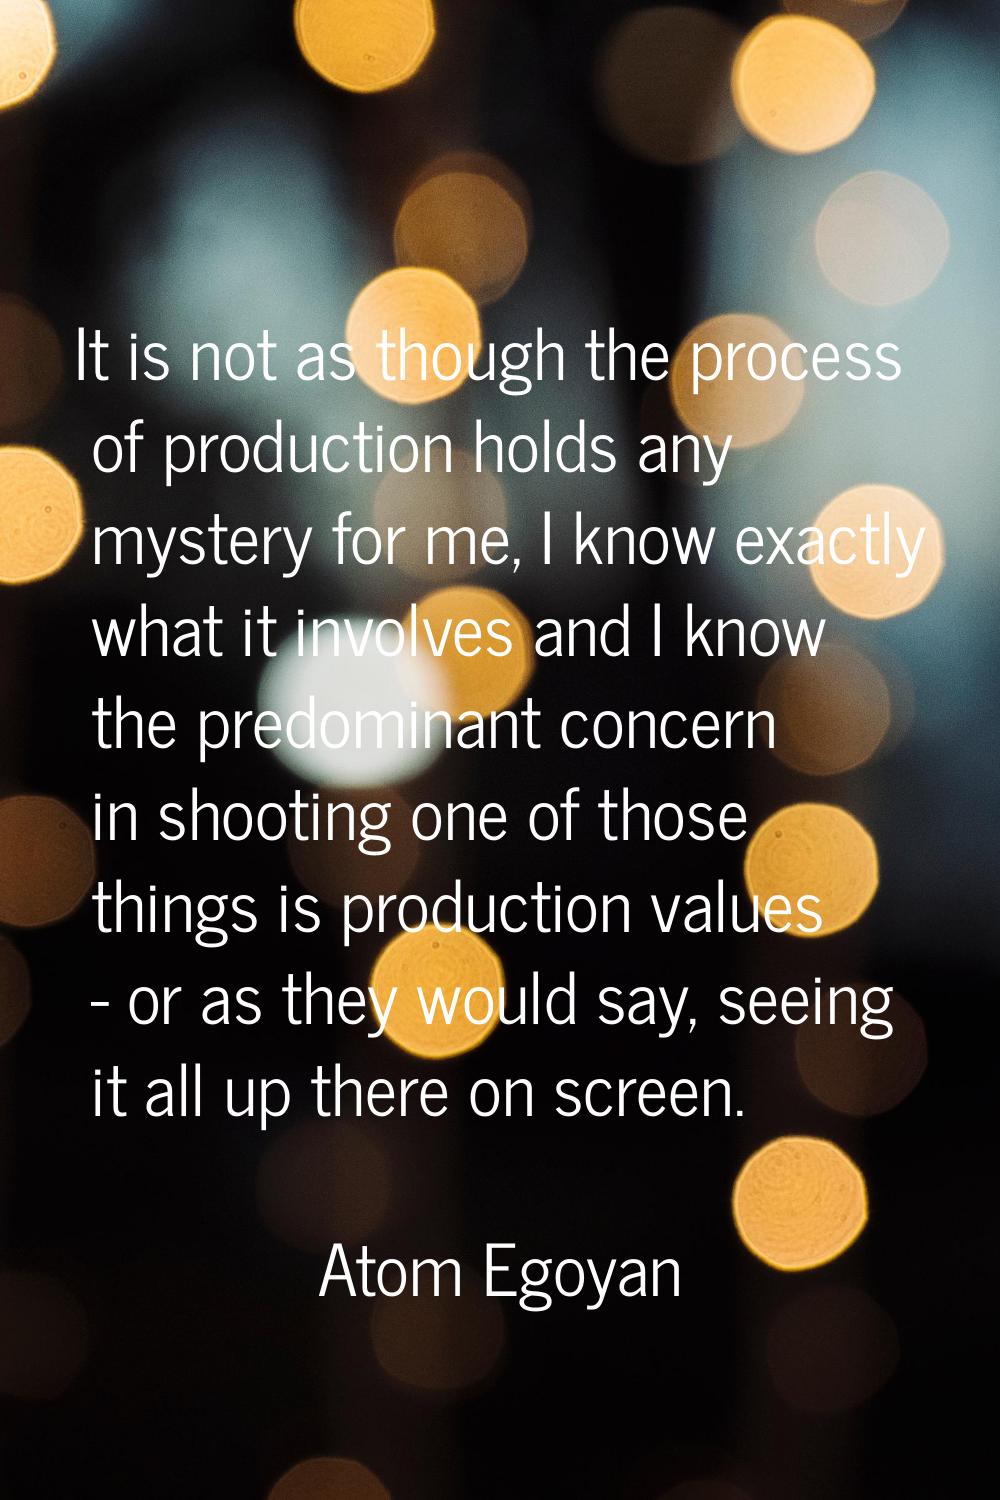 It is not as though the process of production holds any mystery for me, I know exactly what it invo